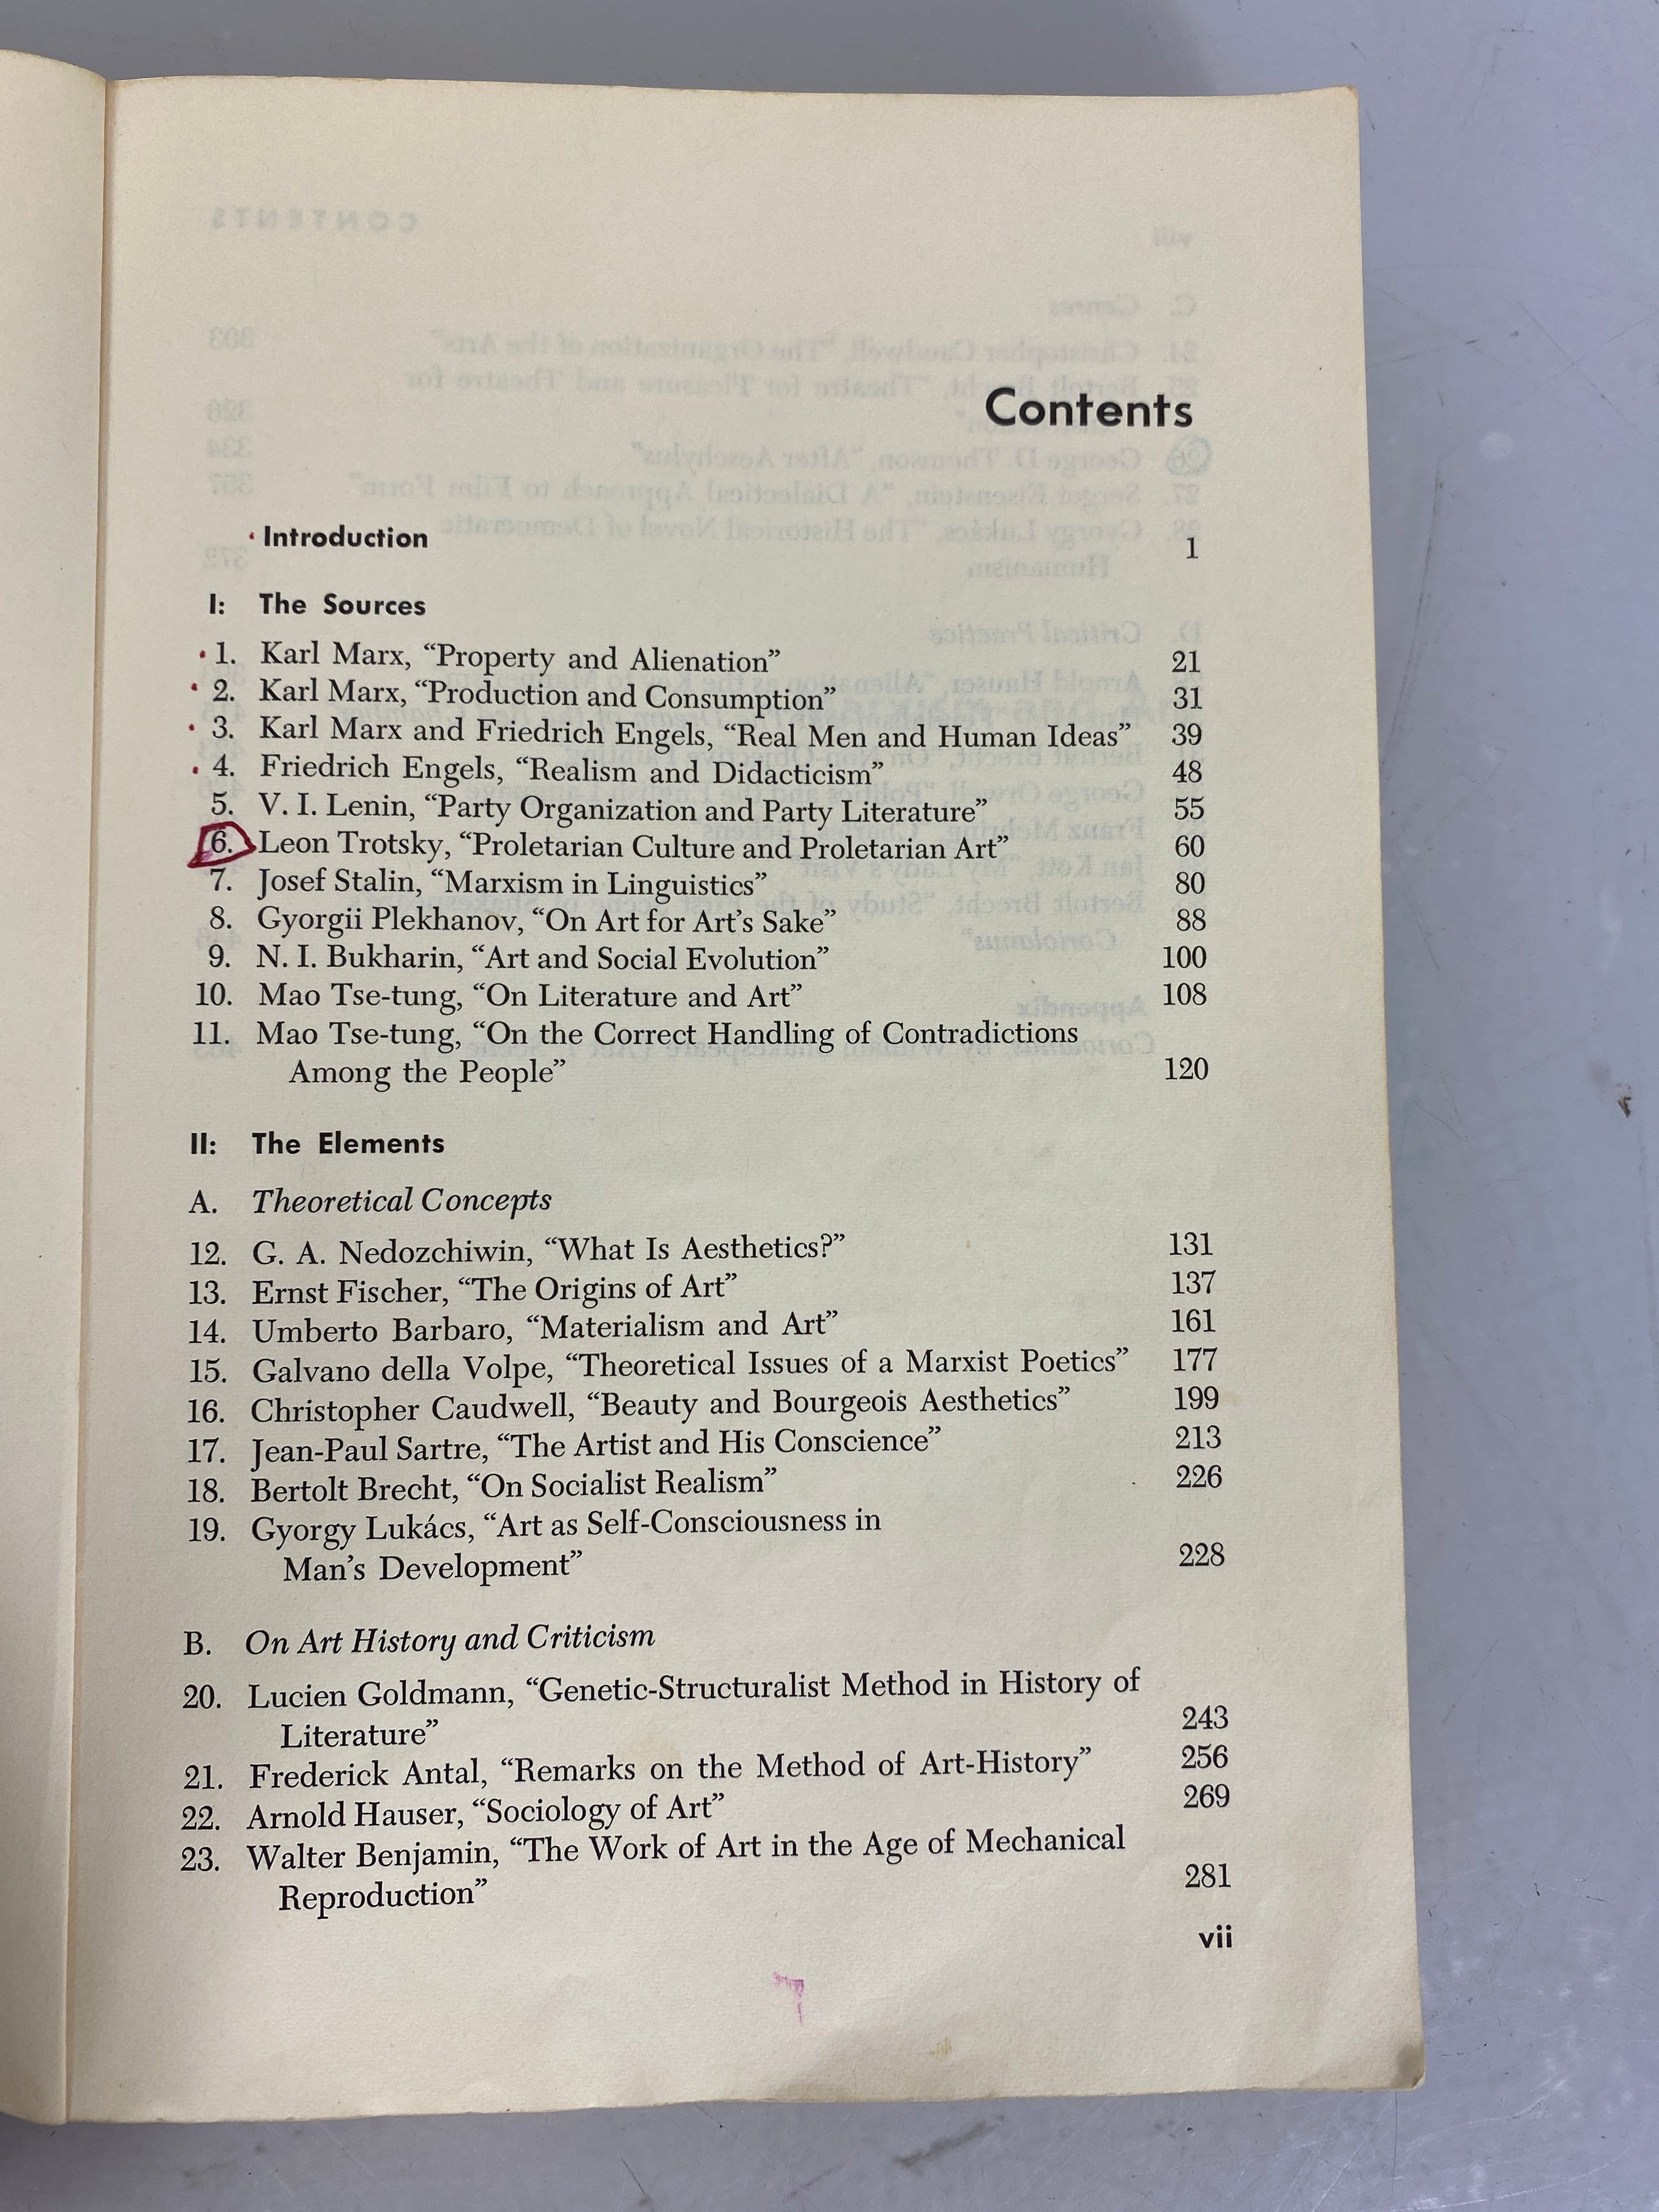 Marxism & Art Writings in Aesthetics and Criticism by Lang and Williams 1972 SC